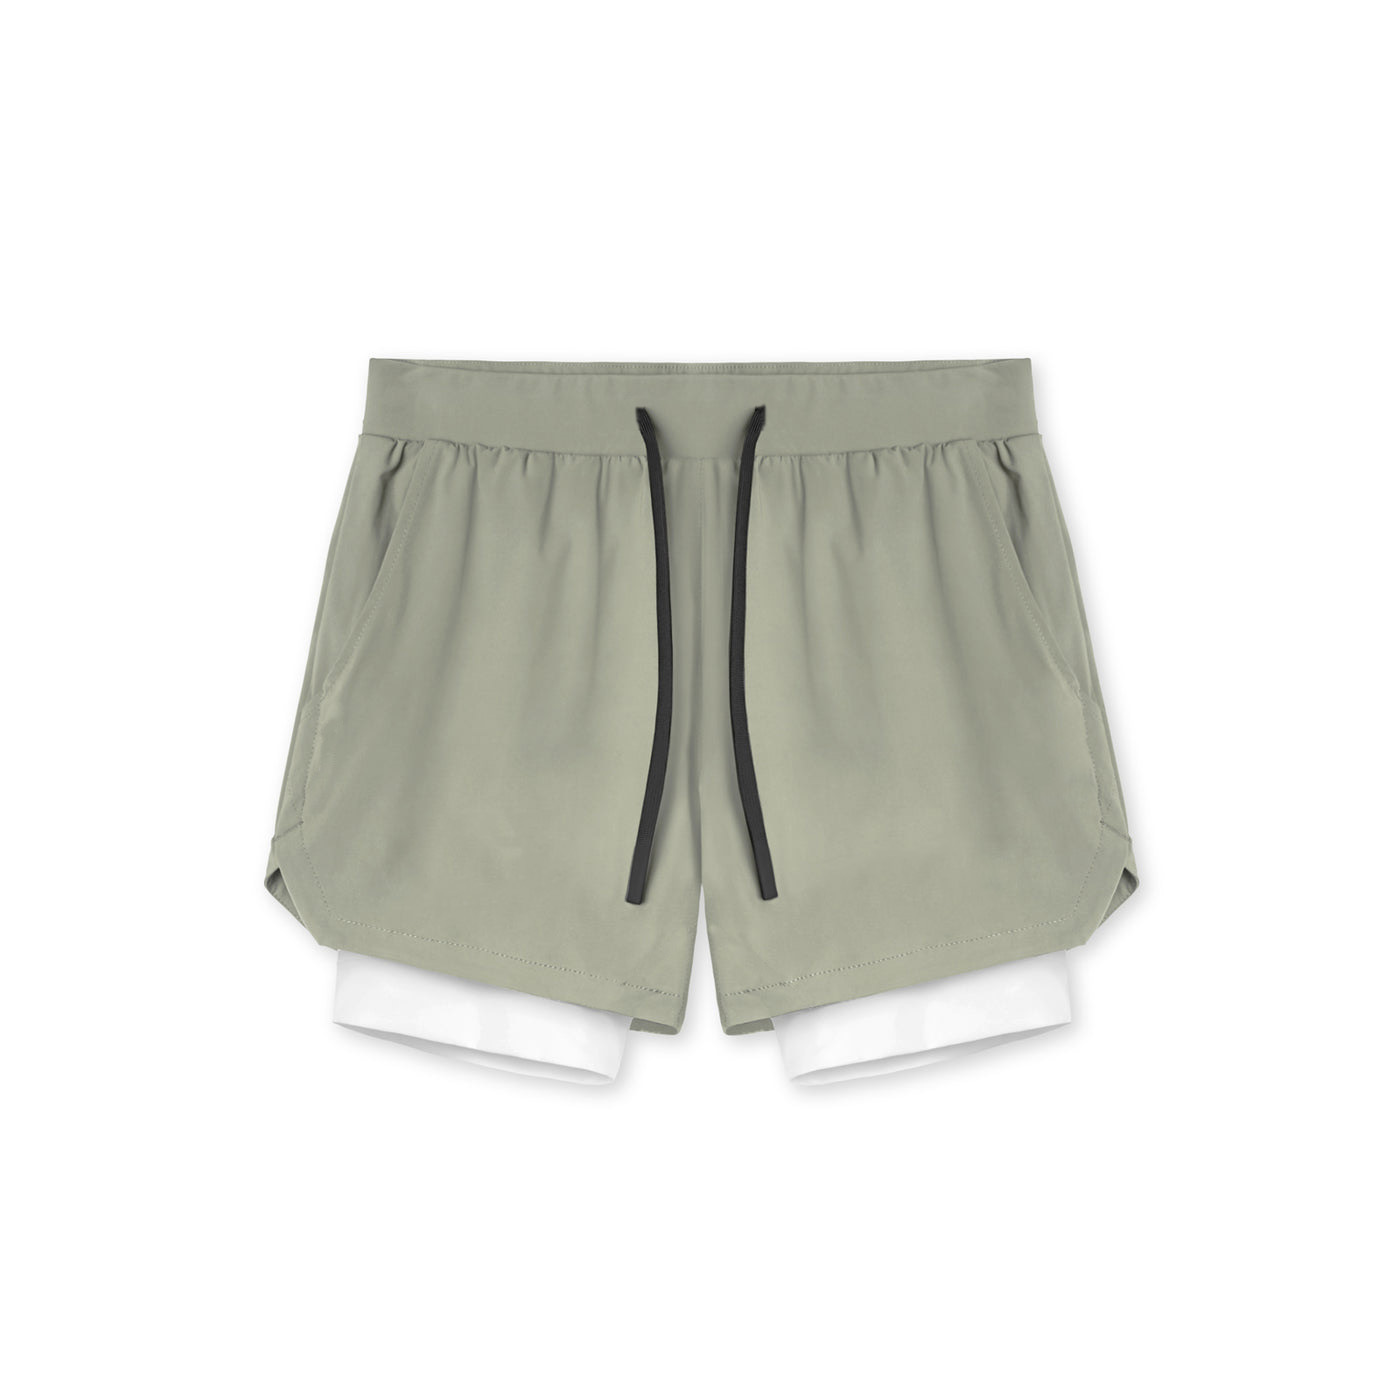 Men's Double-Layered Fitness Shorts for Workouts